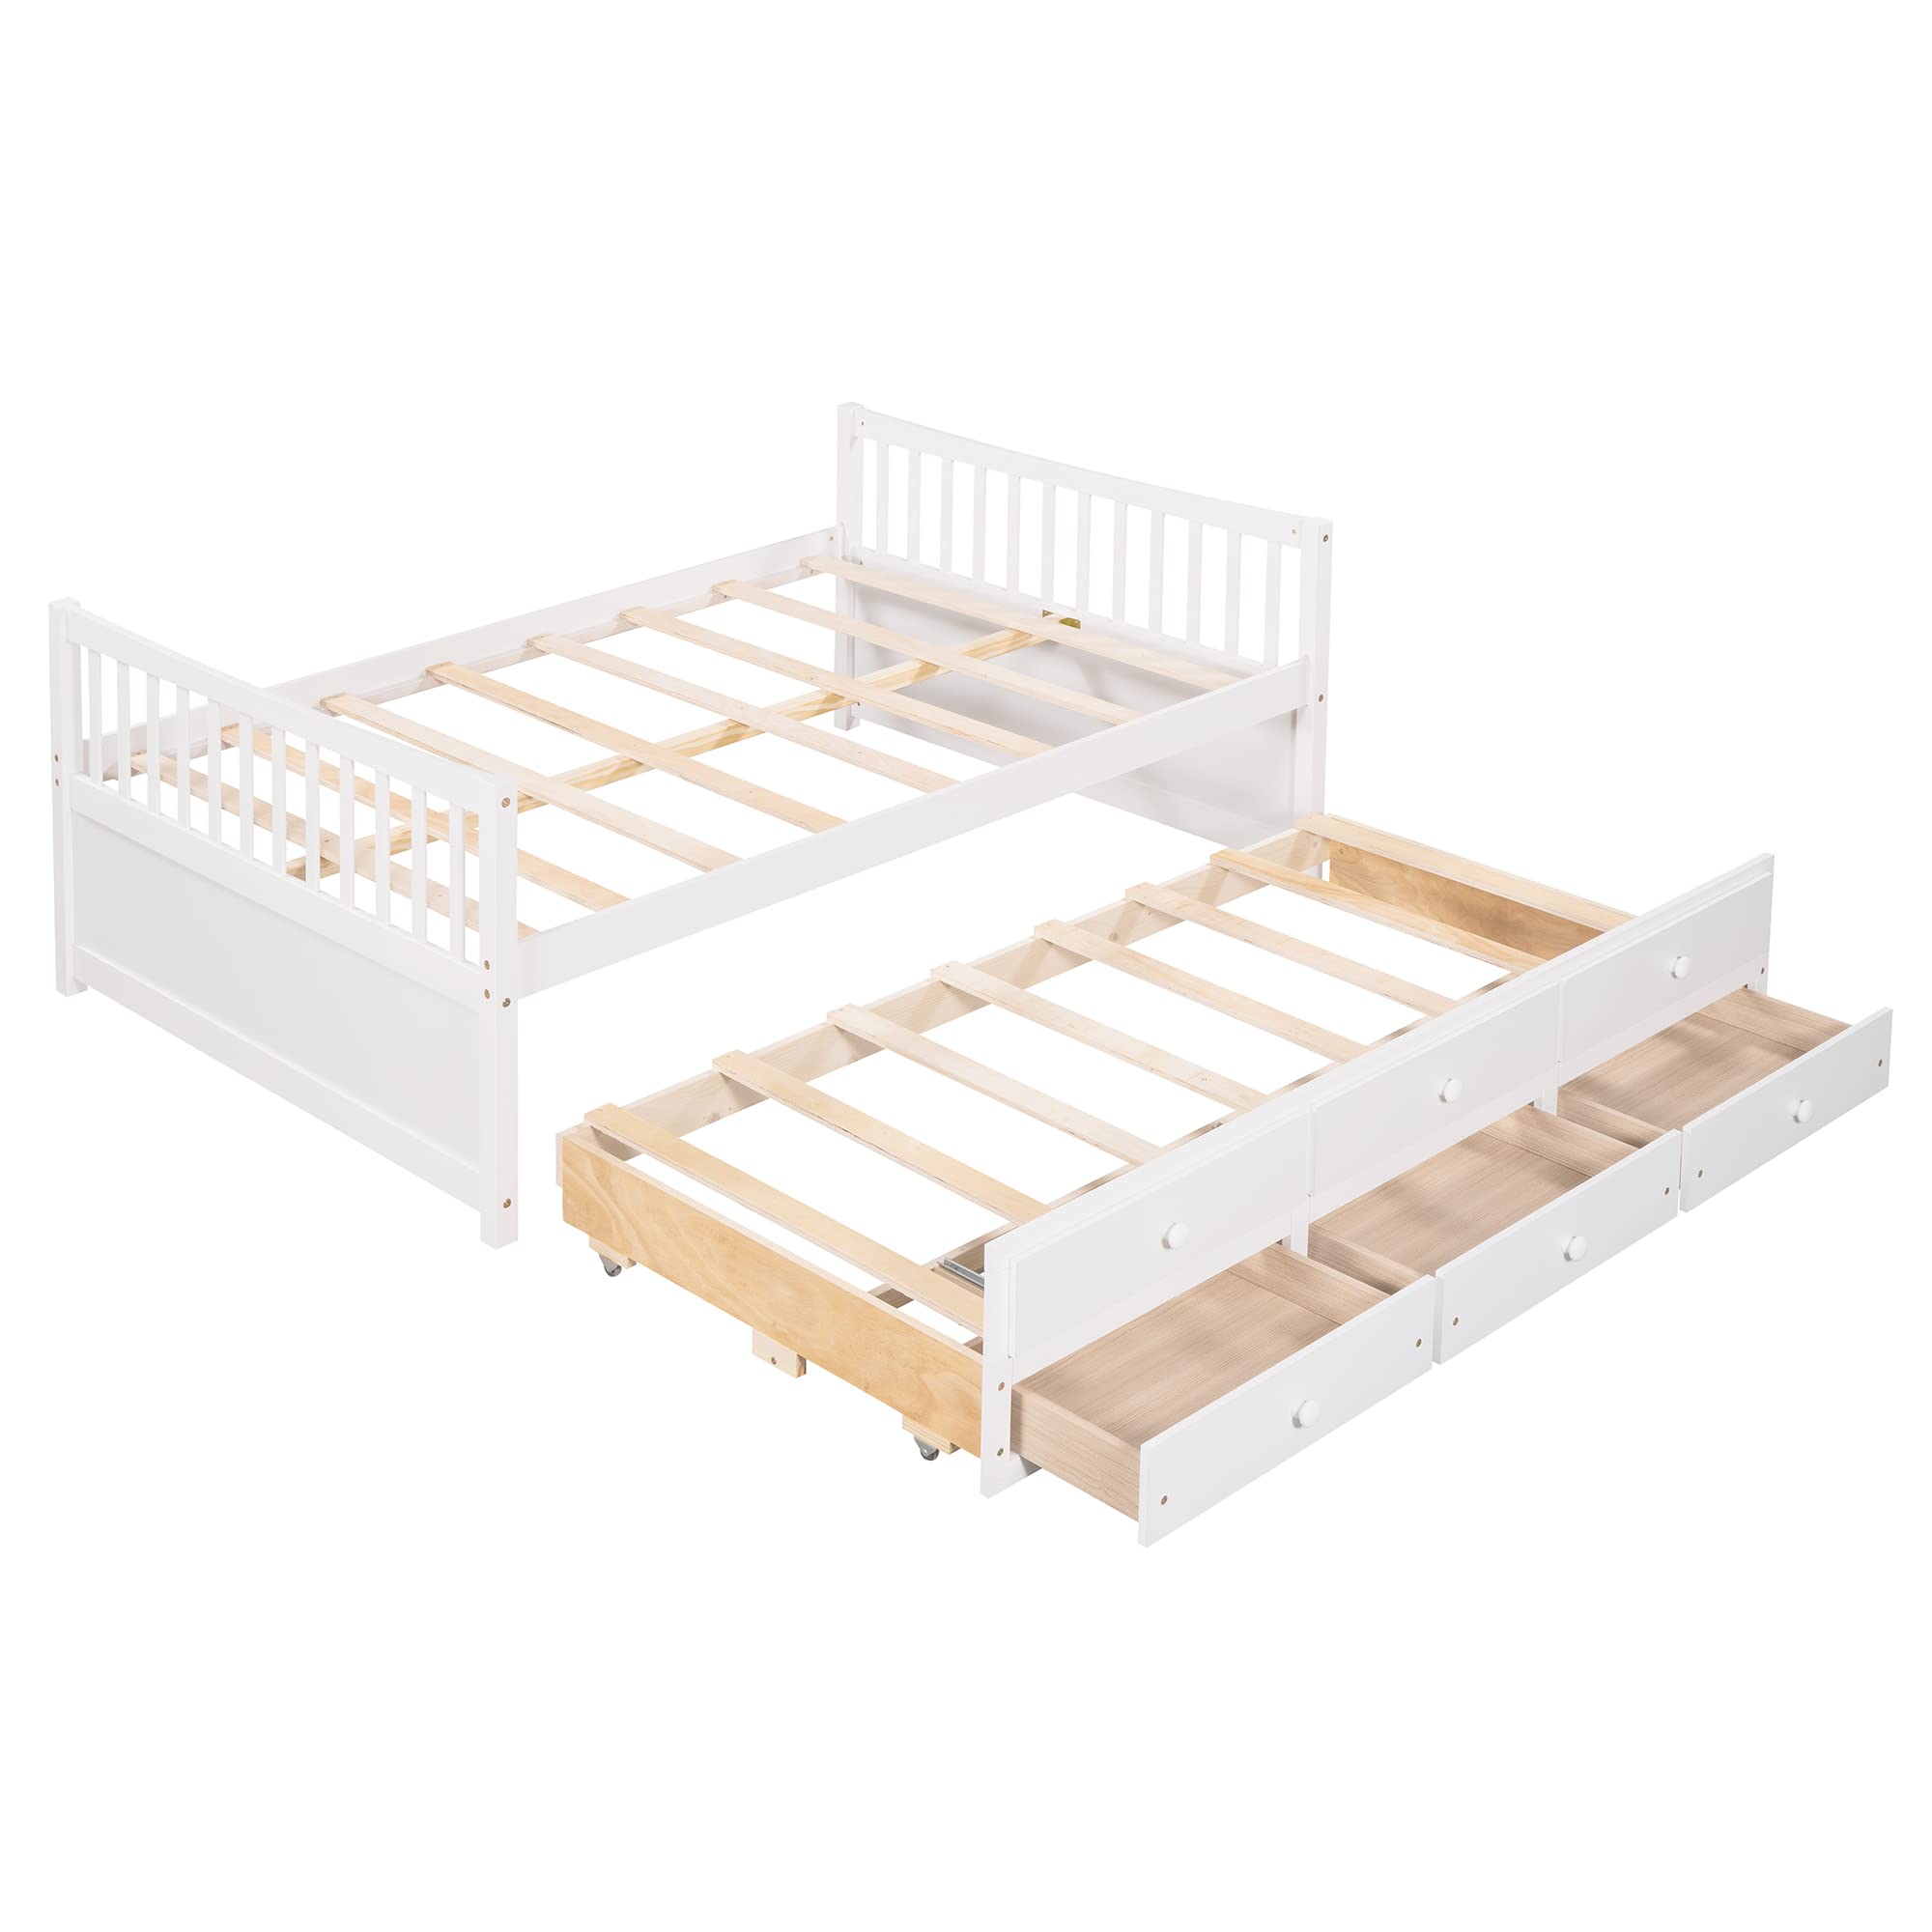 Harper & Bright Designs Full Size Daybed with Twin Size Trundle and 3 Storage Drawers, Wood Full Captain’s Bed with Trundle Bed, Full Platform Bed Great for Kids Guests Sleepovers (White)